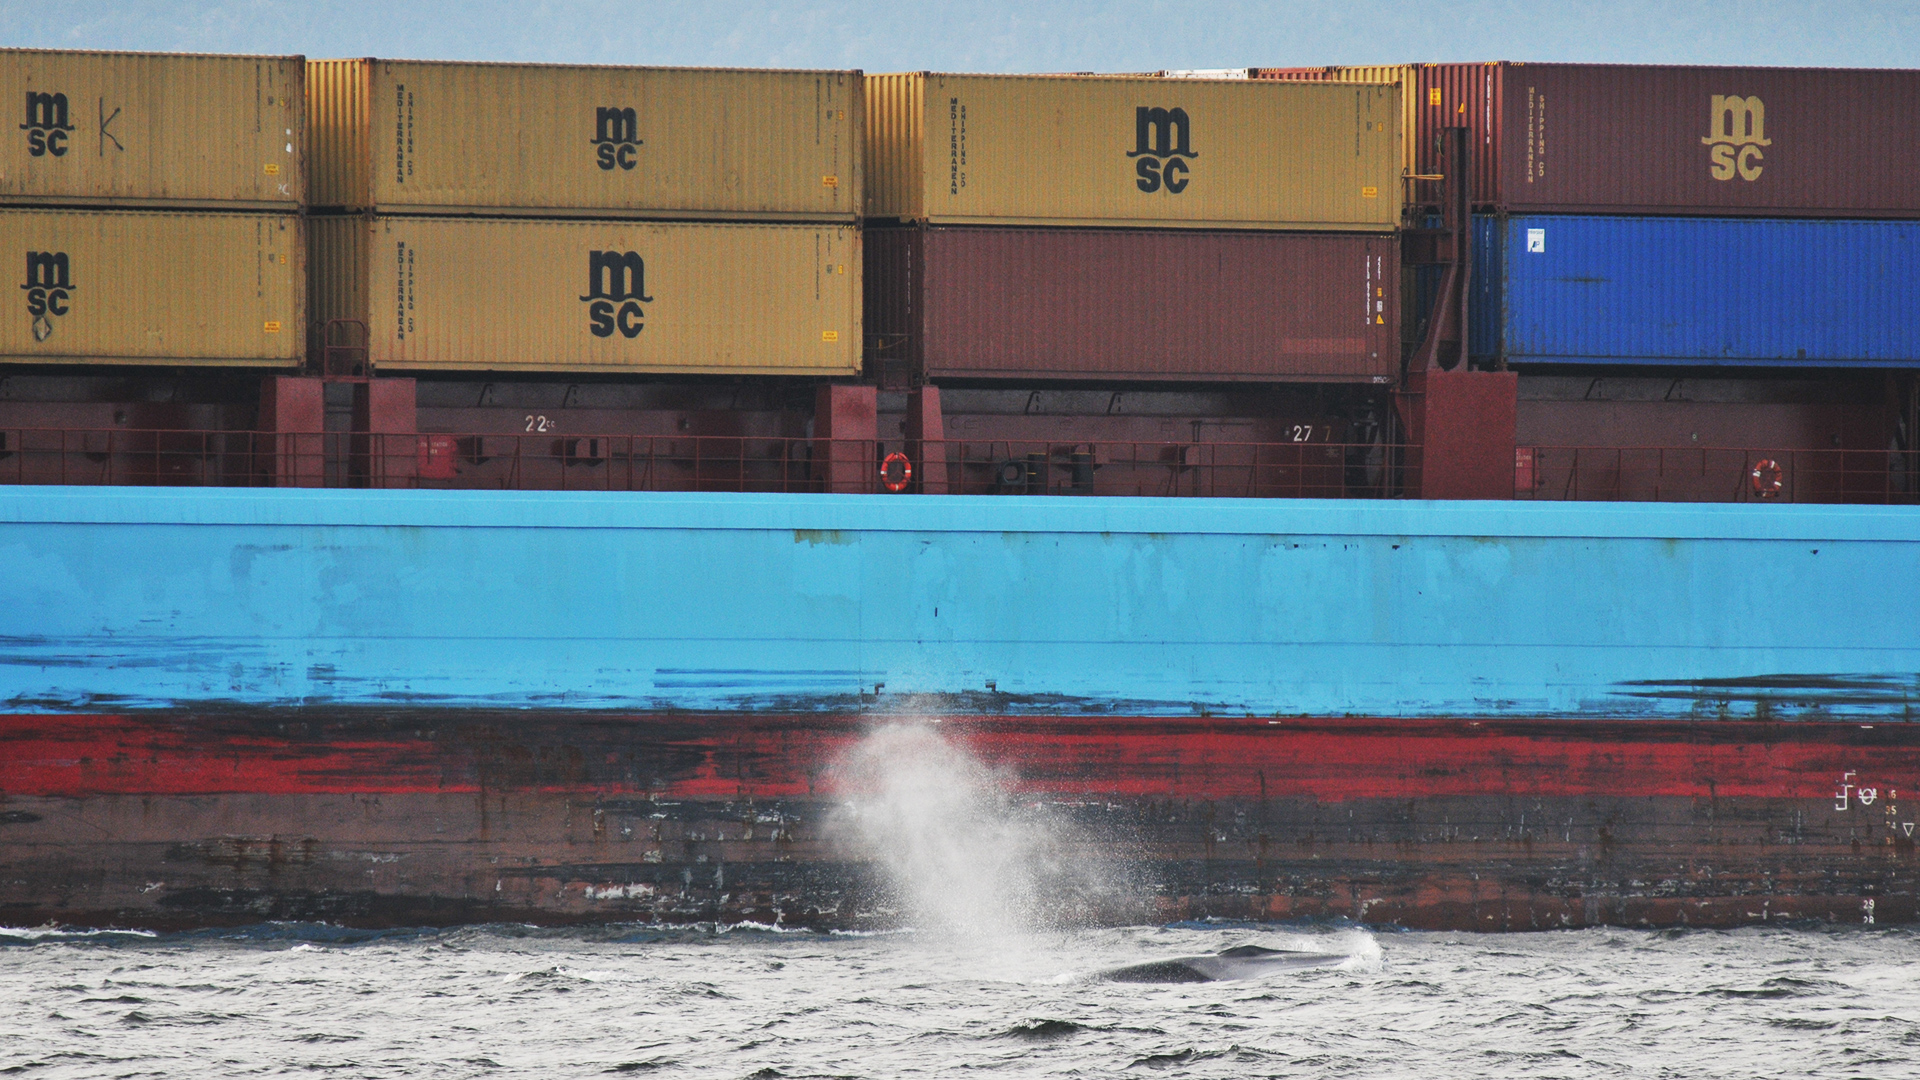 Close-up of a container ship. Ahead and to the side of the boat, we see a fin whale surfacing to breathe. The visible portion of the fin whale is smaller than a single container.